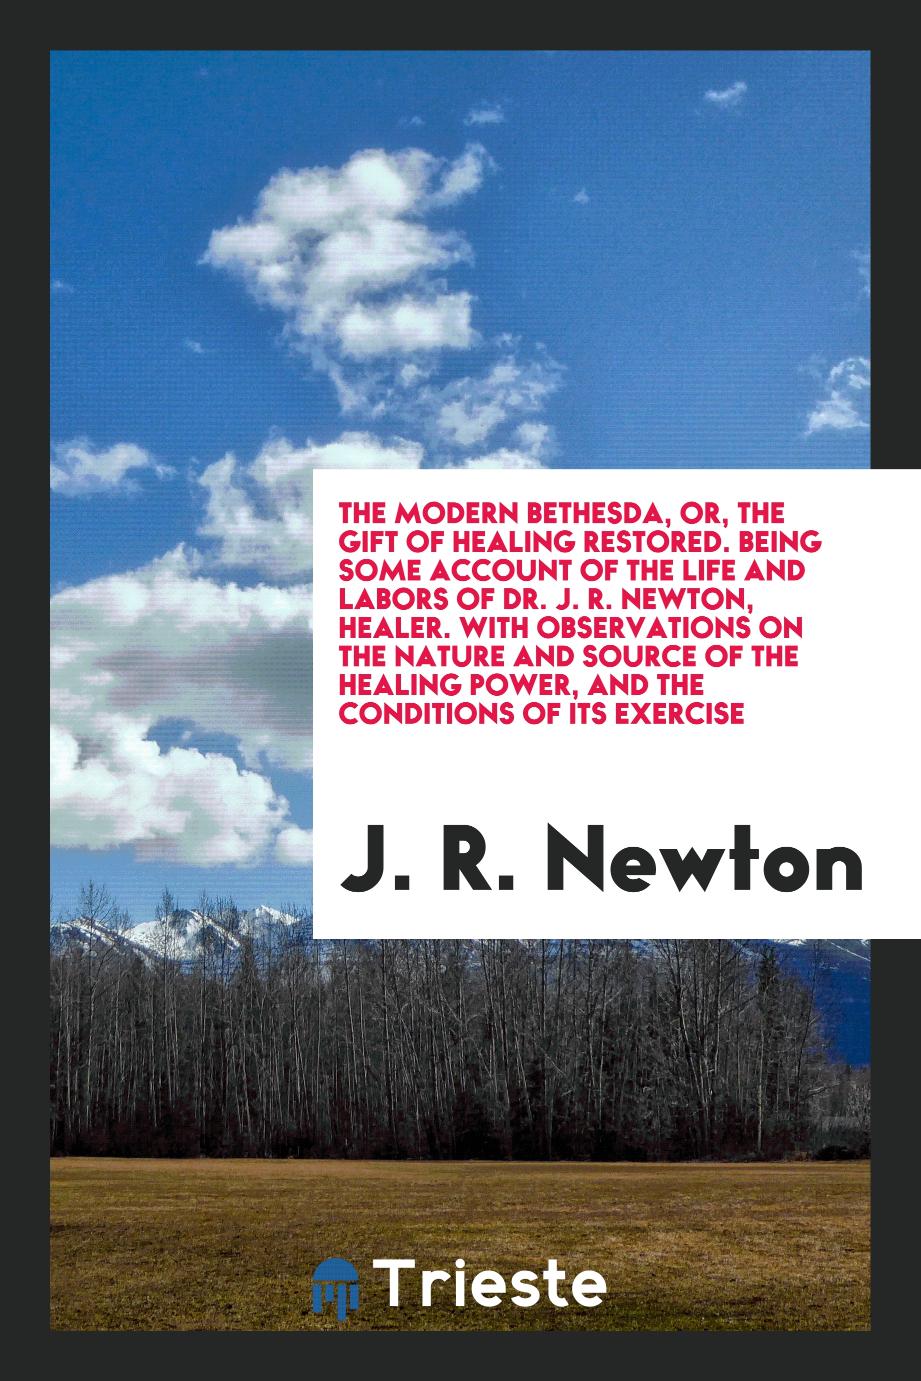 The Modern Bethesda, or, The Gift of Healing Restored. Being Some Account of the Life and Labors of Dr. J. R. Newton, Healer. With Observations on the Nature and Source of the Healing Power, and the Conditions of Its Exercise